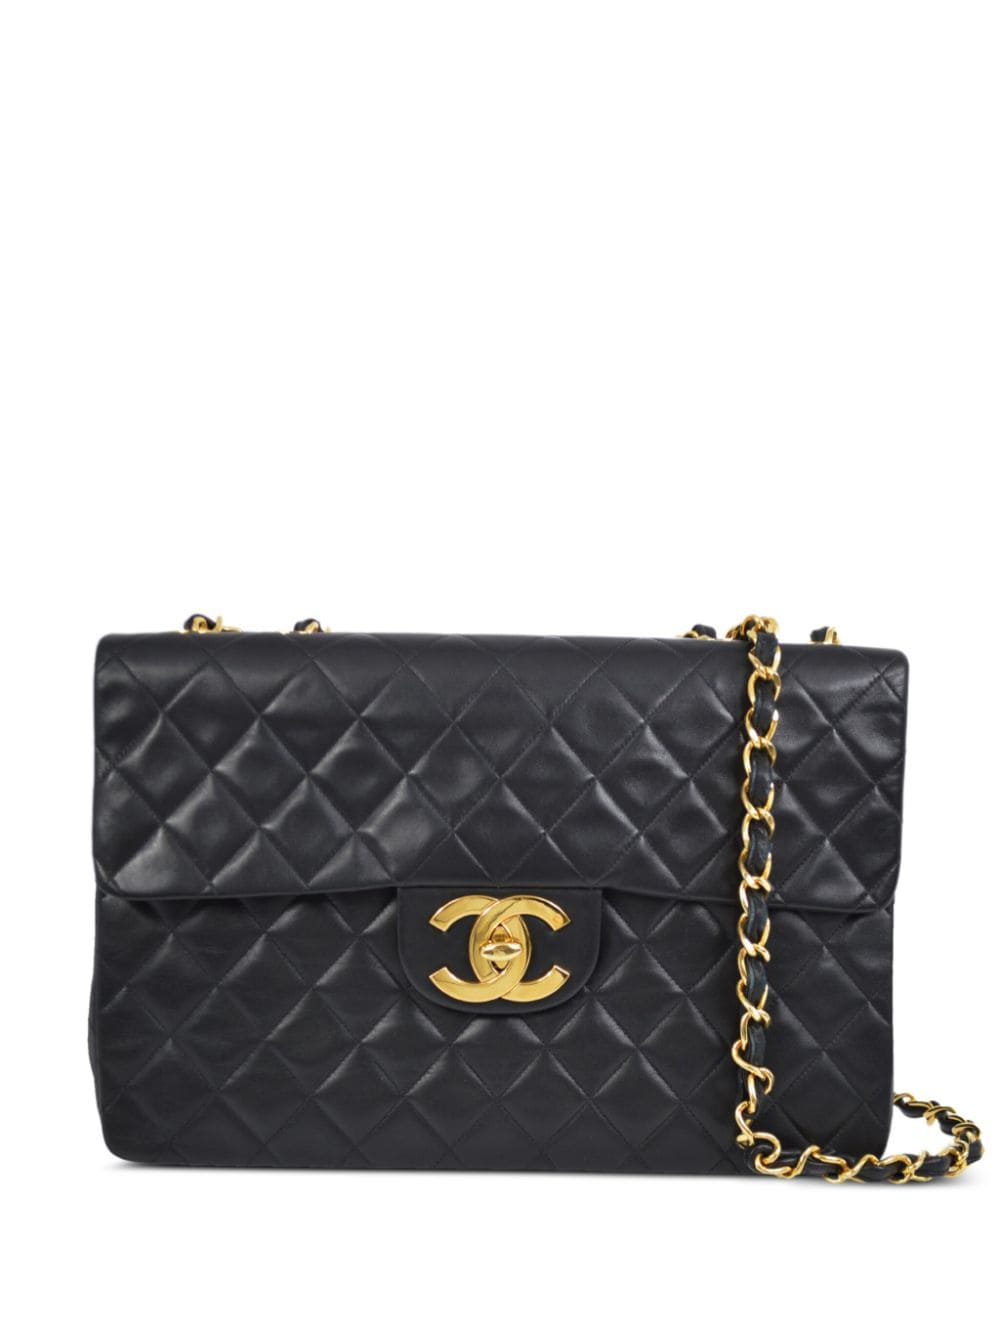 Pre-owned Chanel 1992 Maxi Classic Flap Shoulder Bag In Black